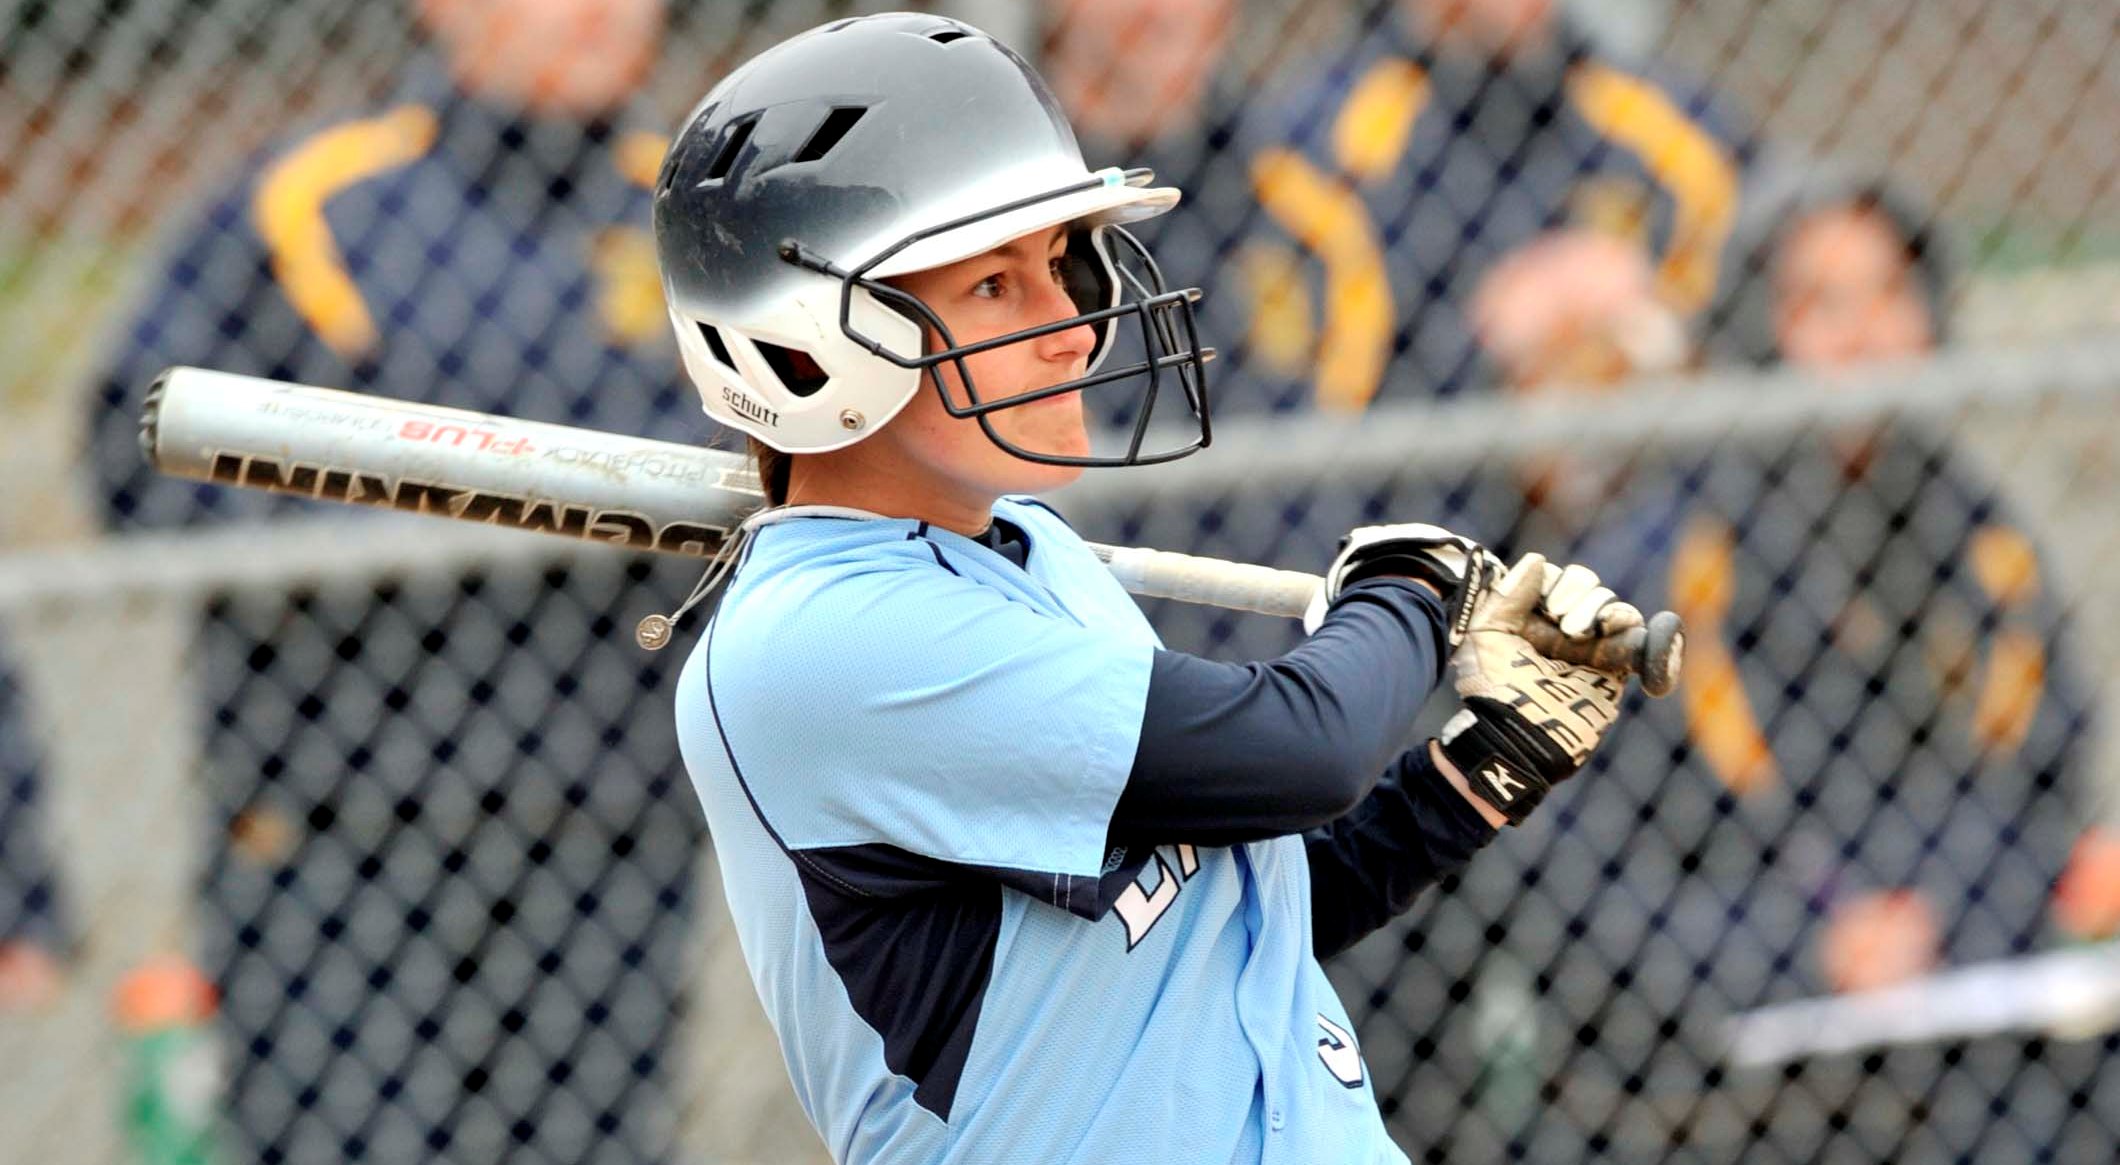 Hot Bats Help Lasell Past Grinnell